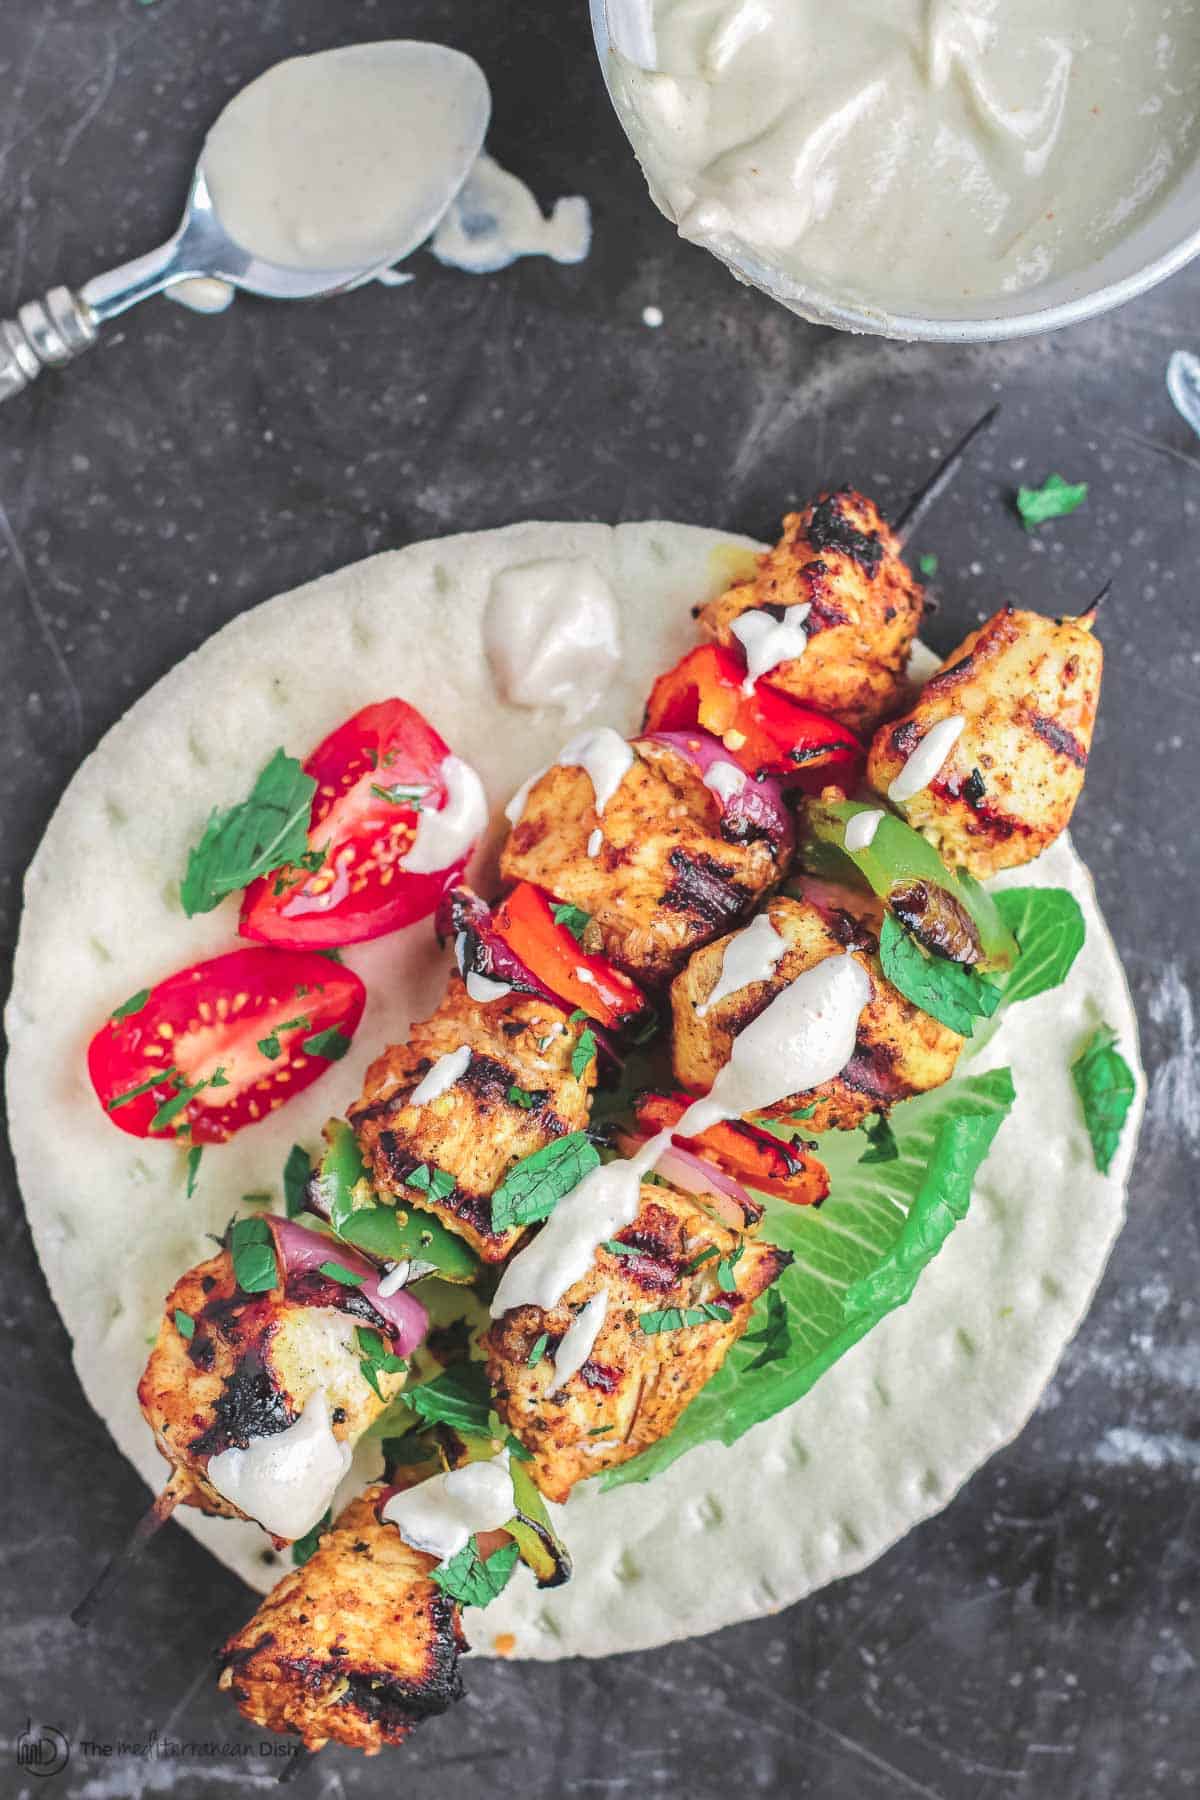 Grilled chicken kabobs served on flatbread with tahini sauce